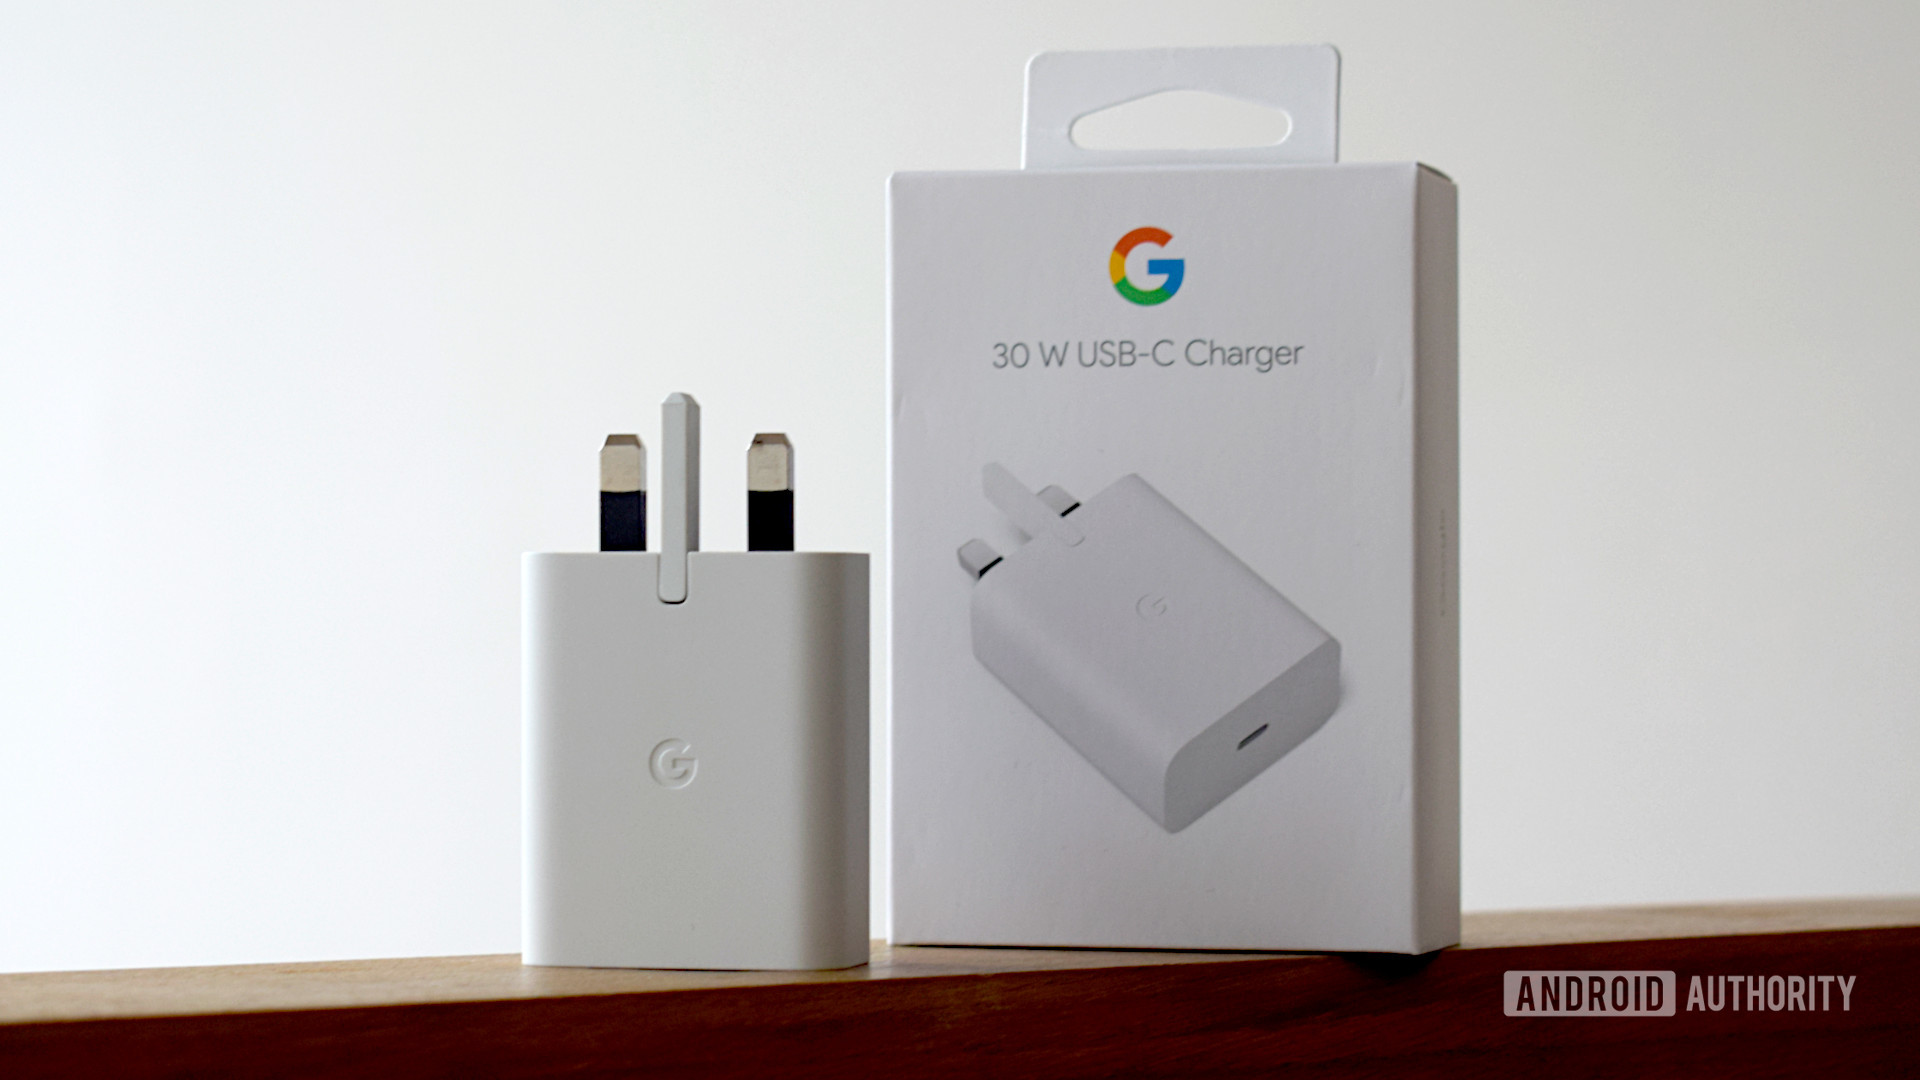 Google 30W USB C Power Charger upright next to box